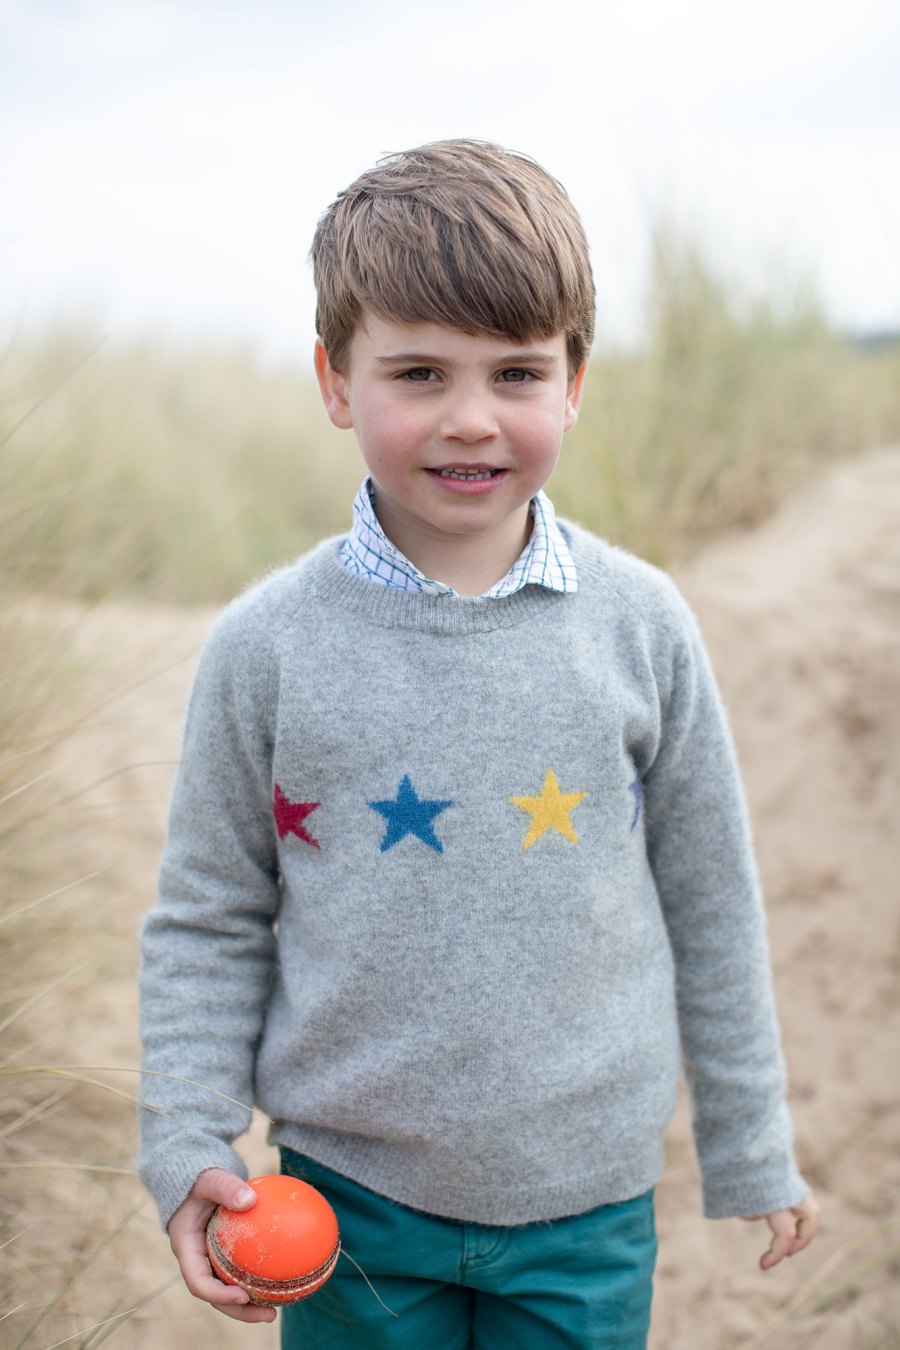 Gallery- Royal Kids’ Cutest Moments of 2022 053 Prince Louis 4th Birthday, Norfolk, UK - Apr 2022